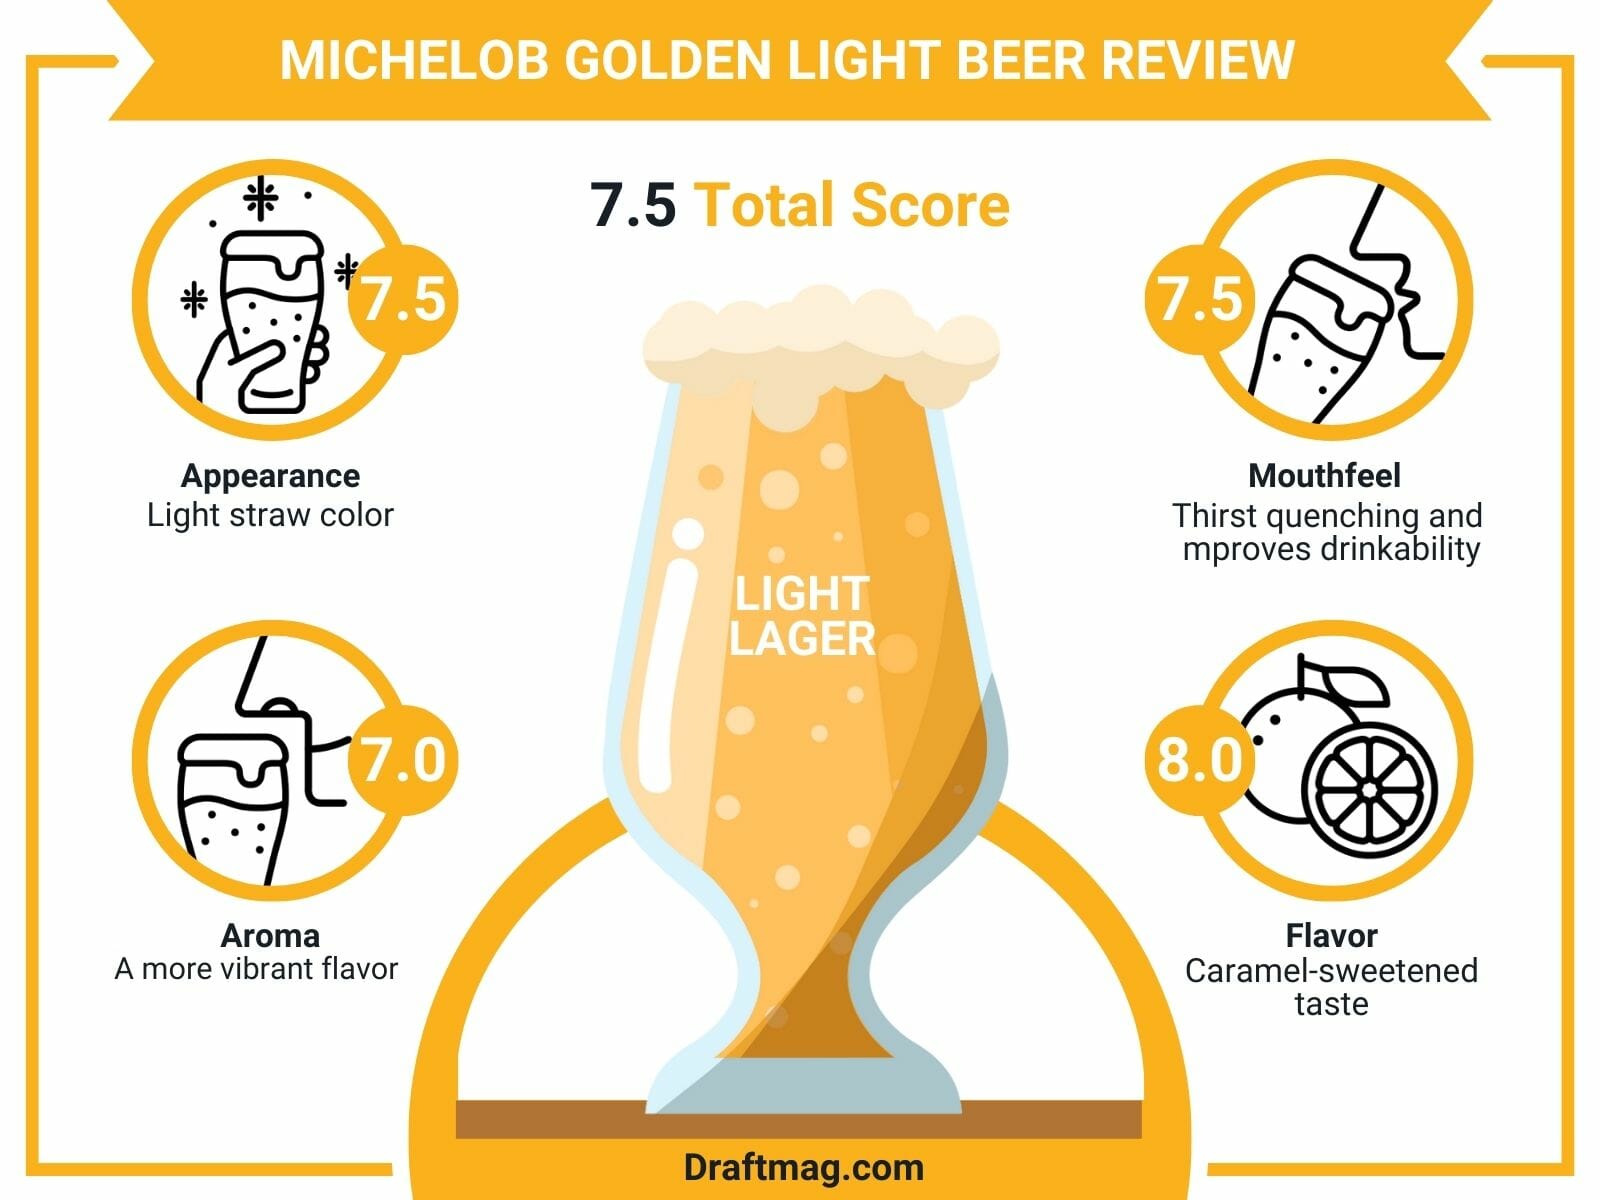 Michelob Golden Light Review Infographic